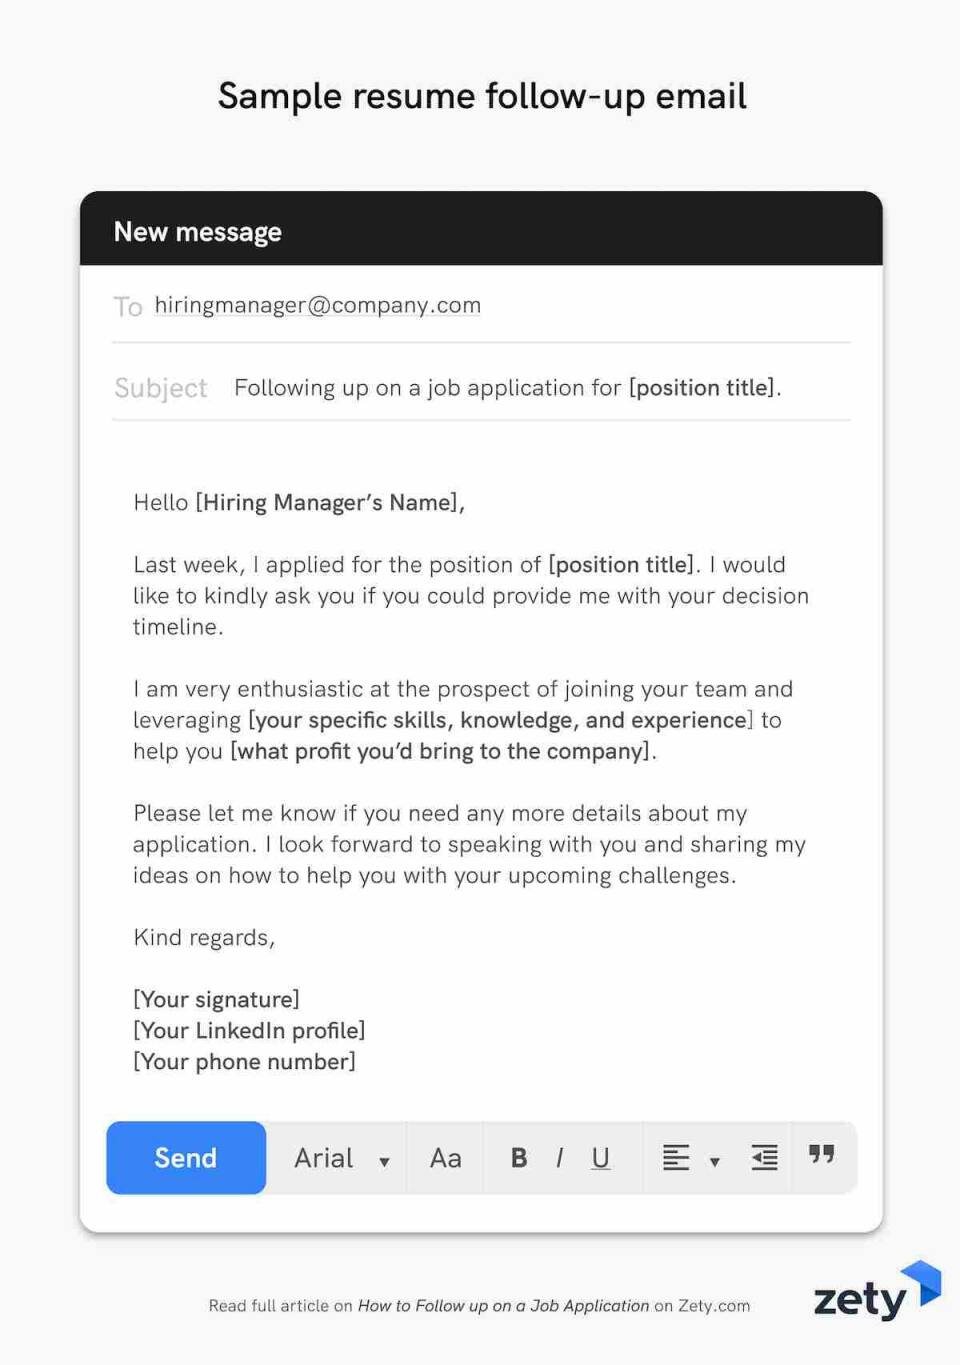 How to Follow up on a Job Application (with Email Samples)